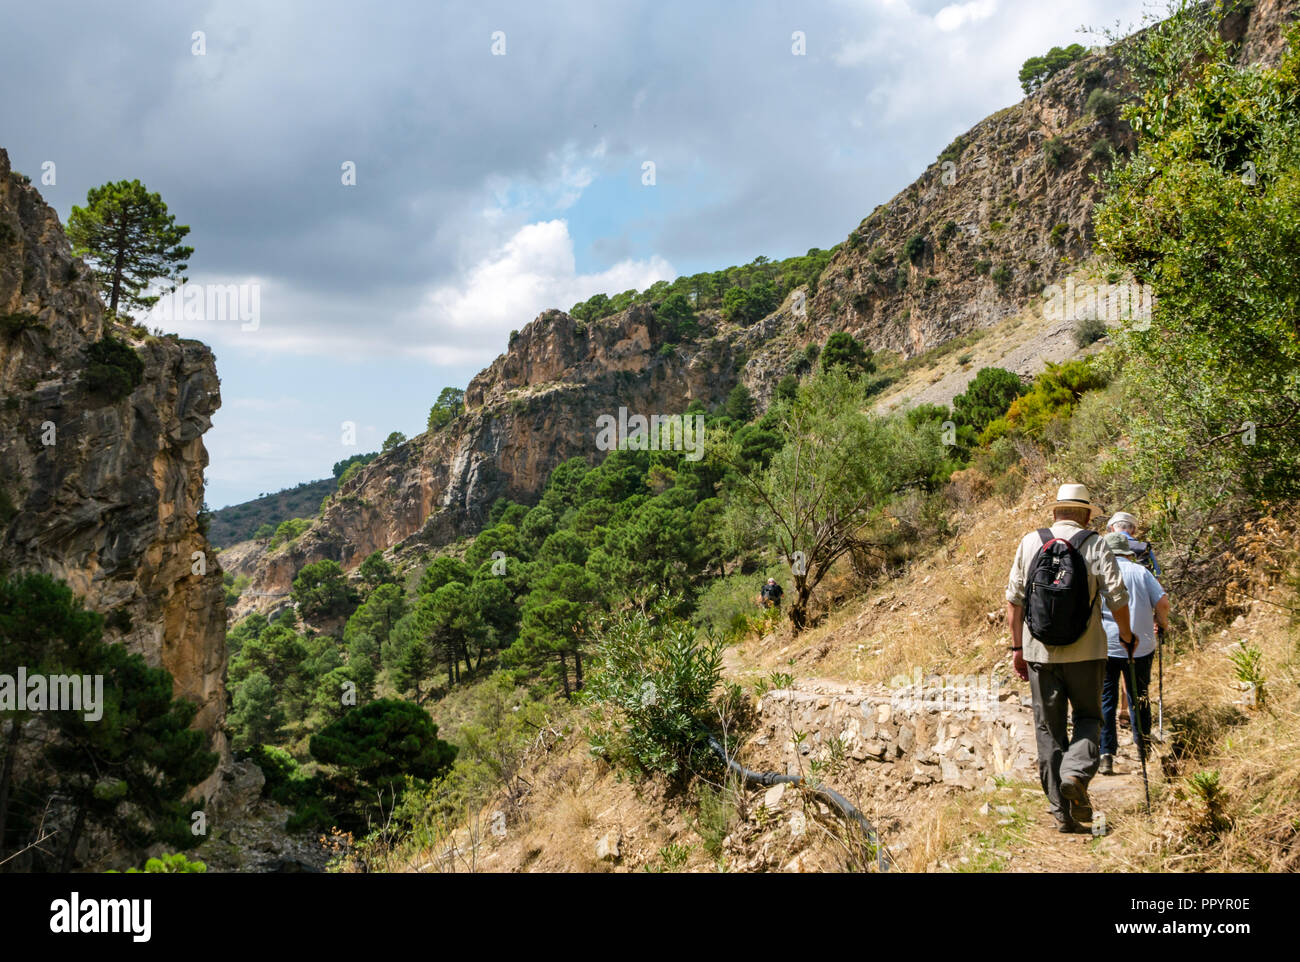 People walking on mountain path, Sierras de Tejeda Natural Park, Axarquia, Andalusia, Spain Stock Photo